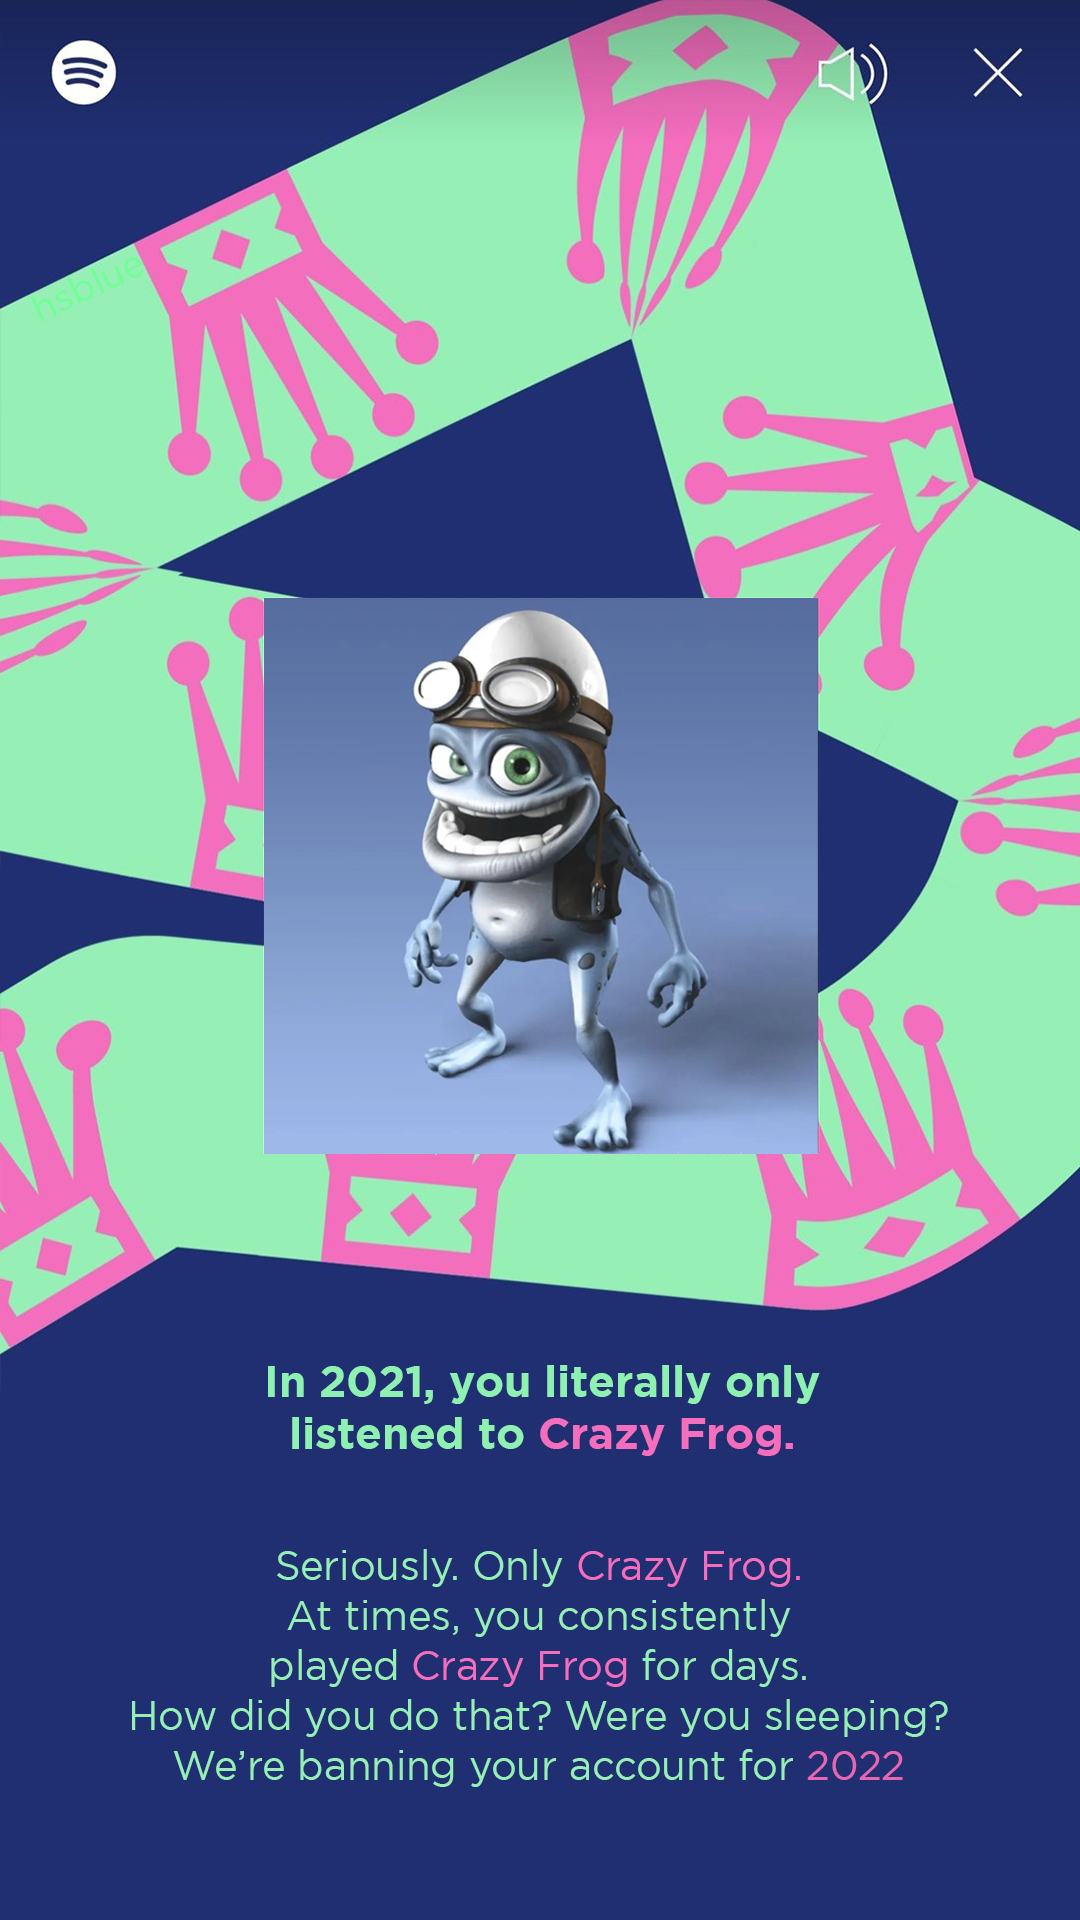 hilarious memes - crazy frog - In 2021, you literally only listened to Crazy Frog. Seriously. Only Crazy Frog. At times, you consistently played Crazy Frog for days How did you do that? Were you sleeping? We're banning your account for 2022